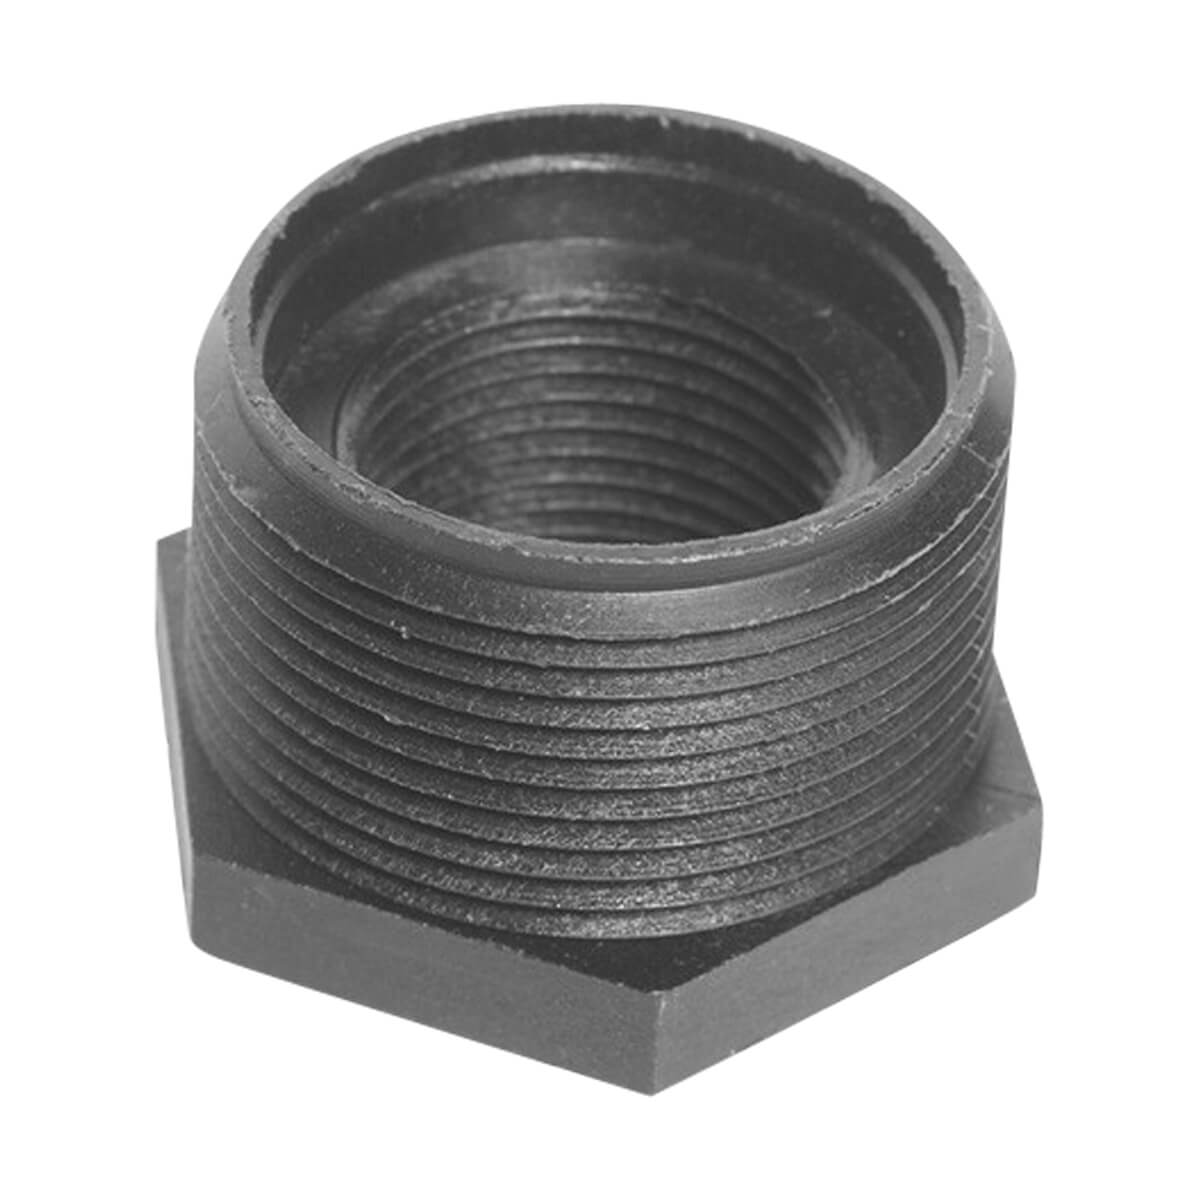 Reducer Bushings MPT x FPT - 2-in x 1-in